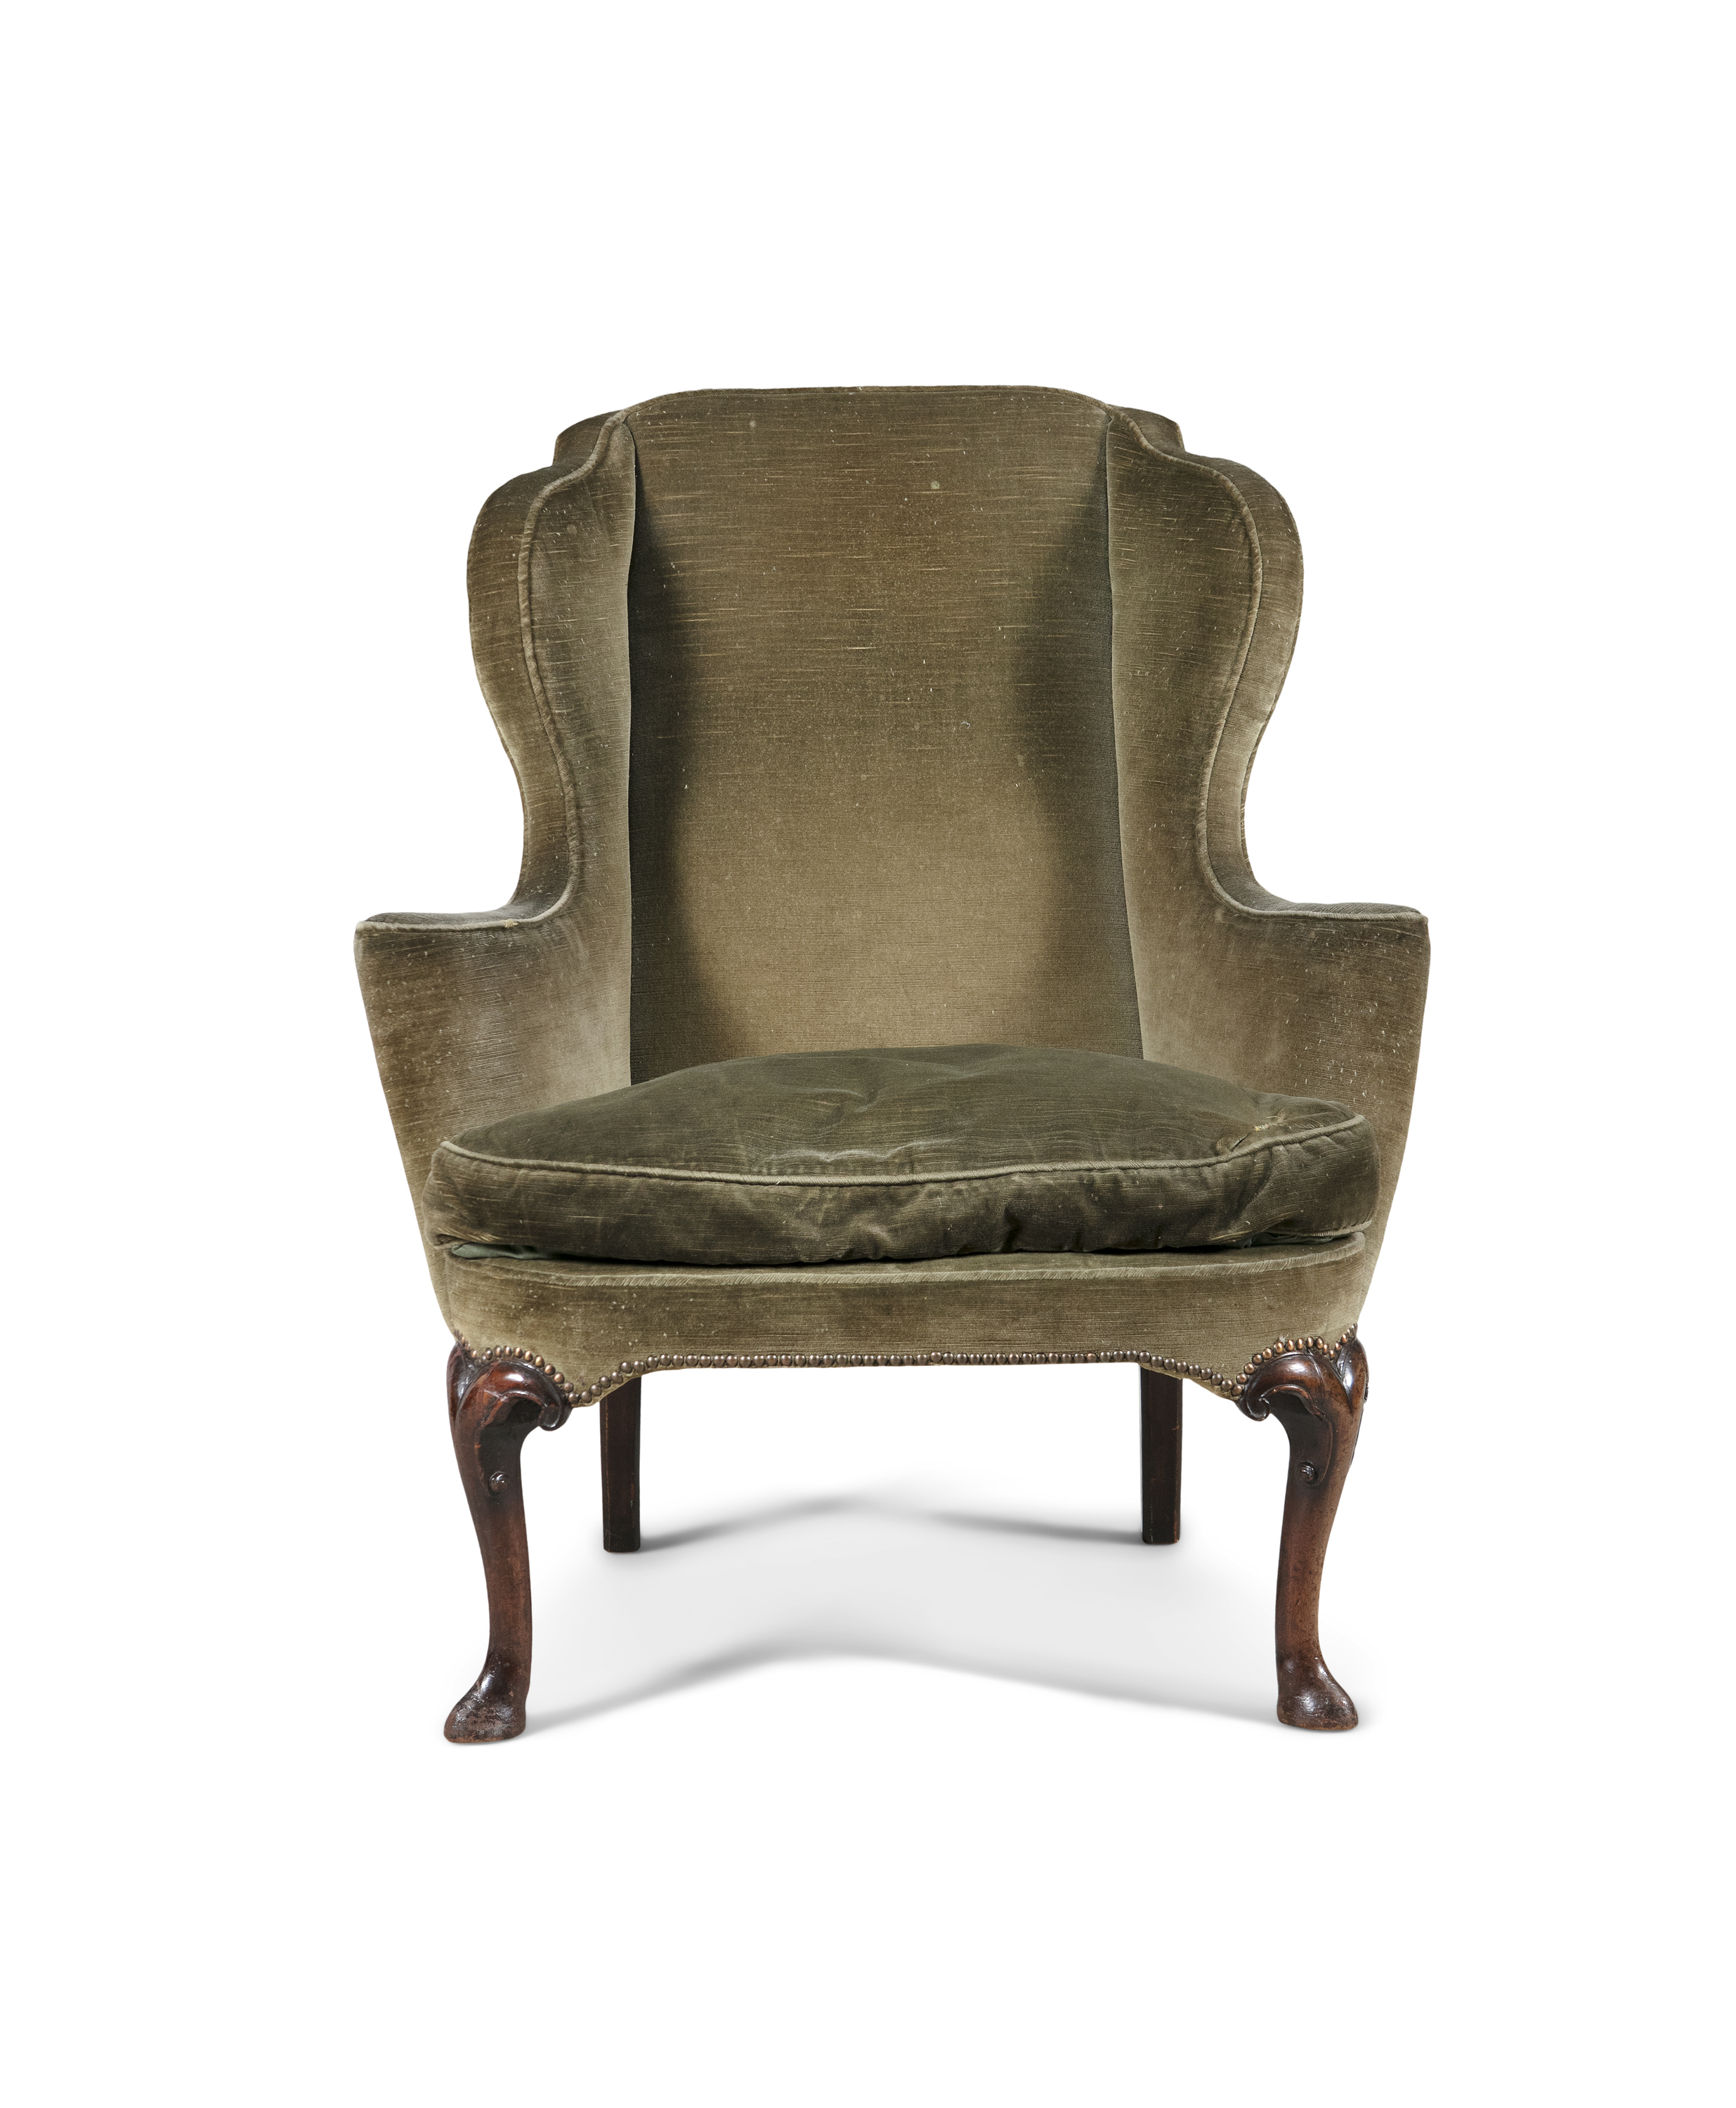 A GEORGE III MAHOGANY FRAMED WING BACK ARMCHAIR, upholstered in moss green fabric, on cabriole - Image 2 of 2